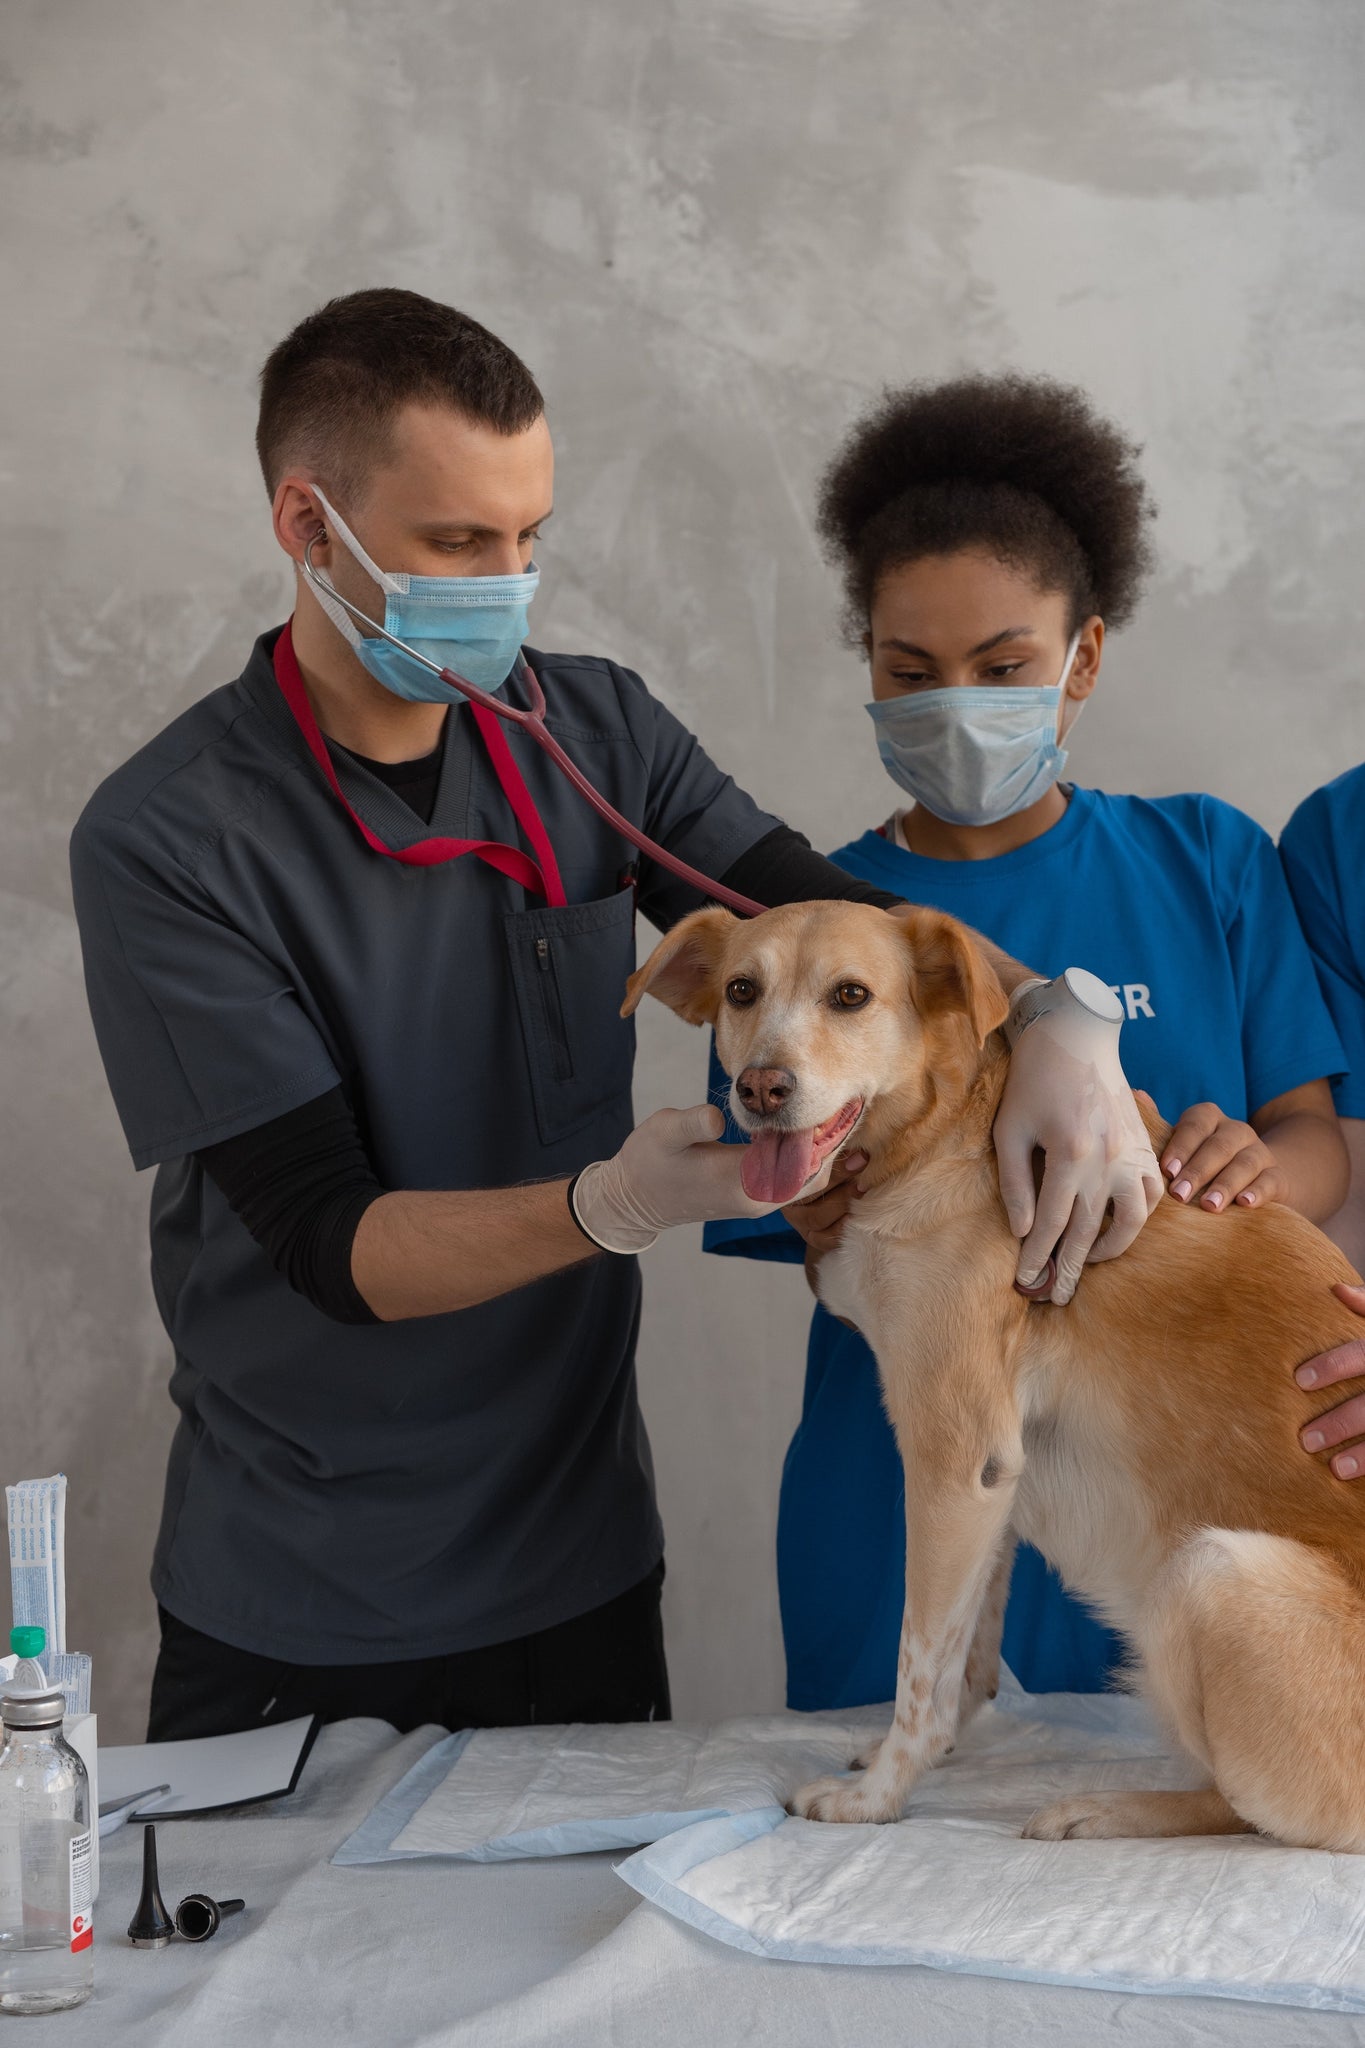 Quick Question: Who should Pet Parents seek professional care from in an emergency situation?